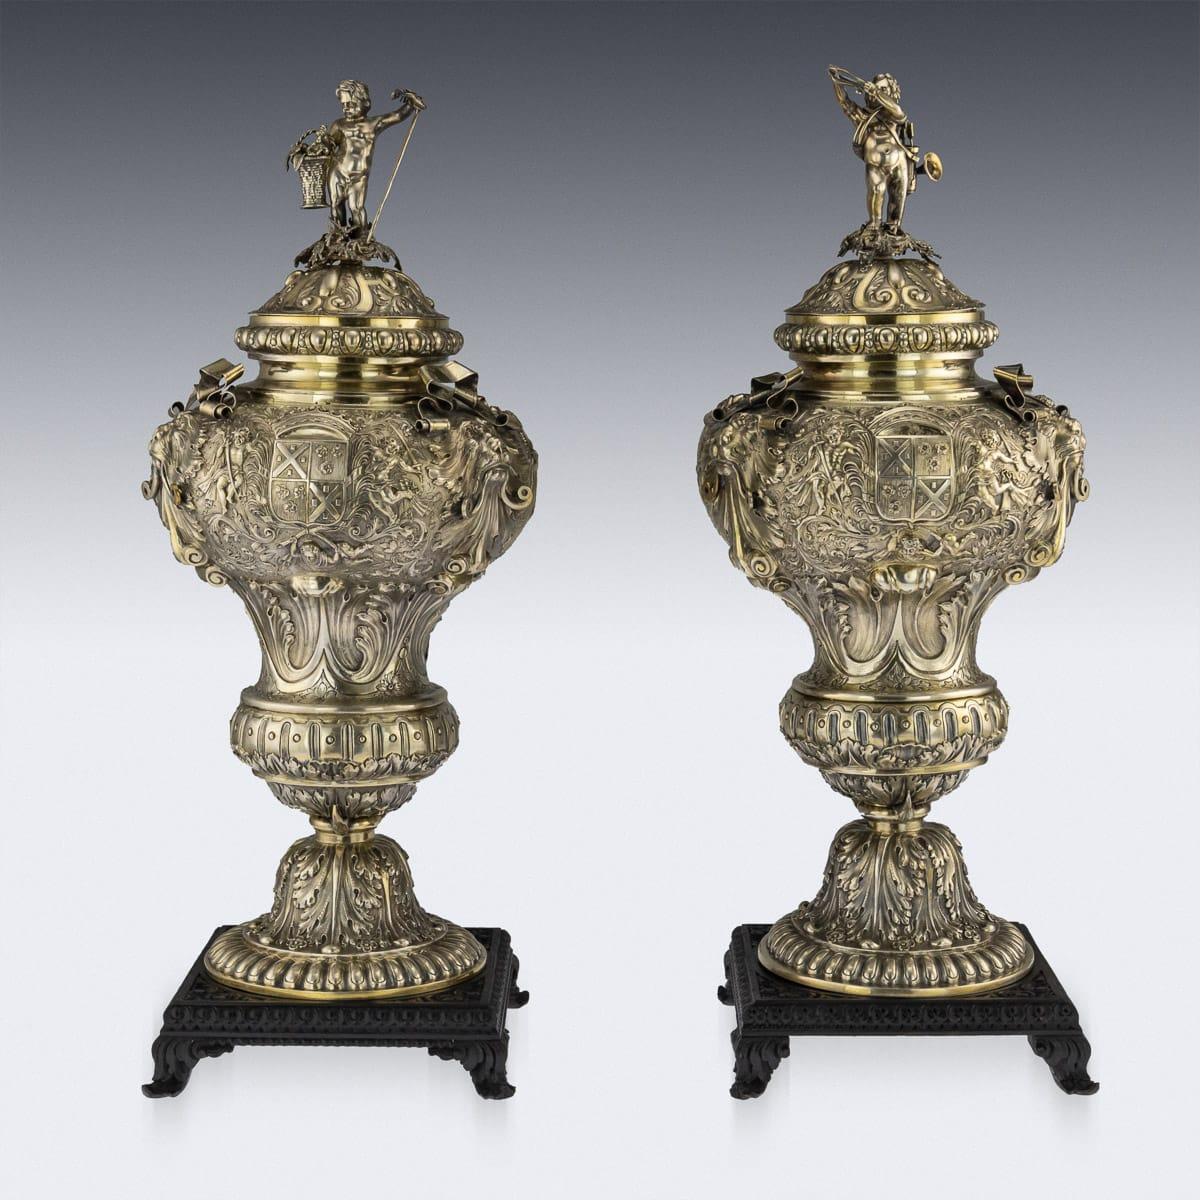 Antique 19th century German (Hanau) magnificent solid silver-gilt pair of large lidded vases. Of inverted pear shape on acanthus leaf and lobed bases, both chased with elaborate coats-of-arms flanked by putti with swords and two agricultural scenes,